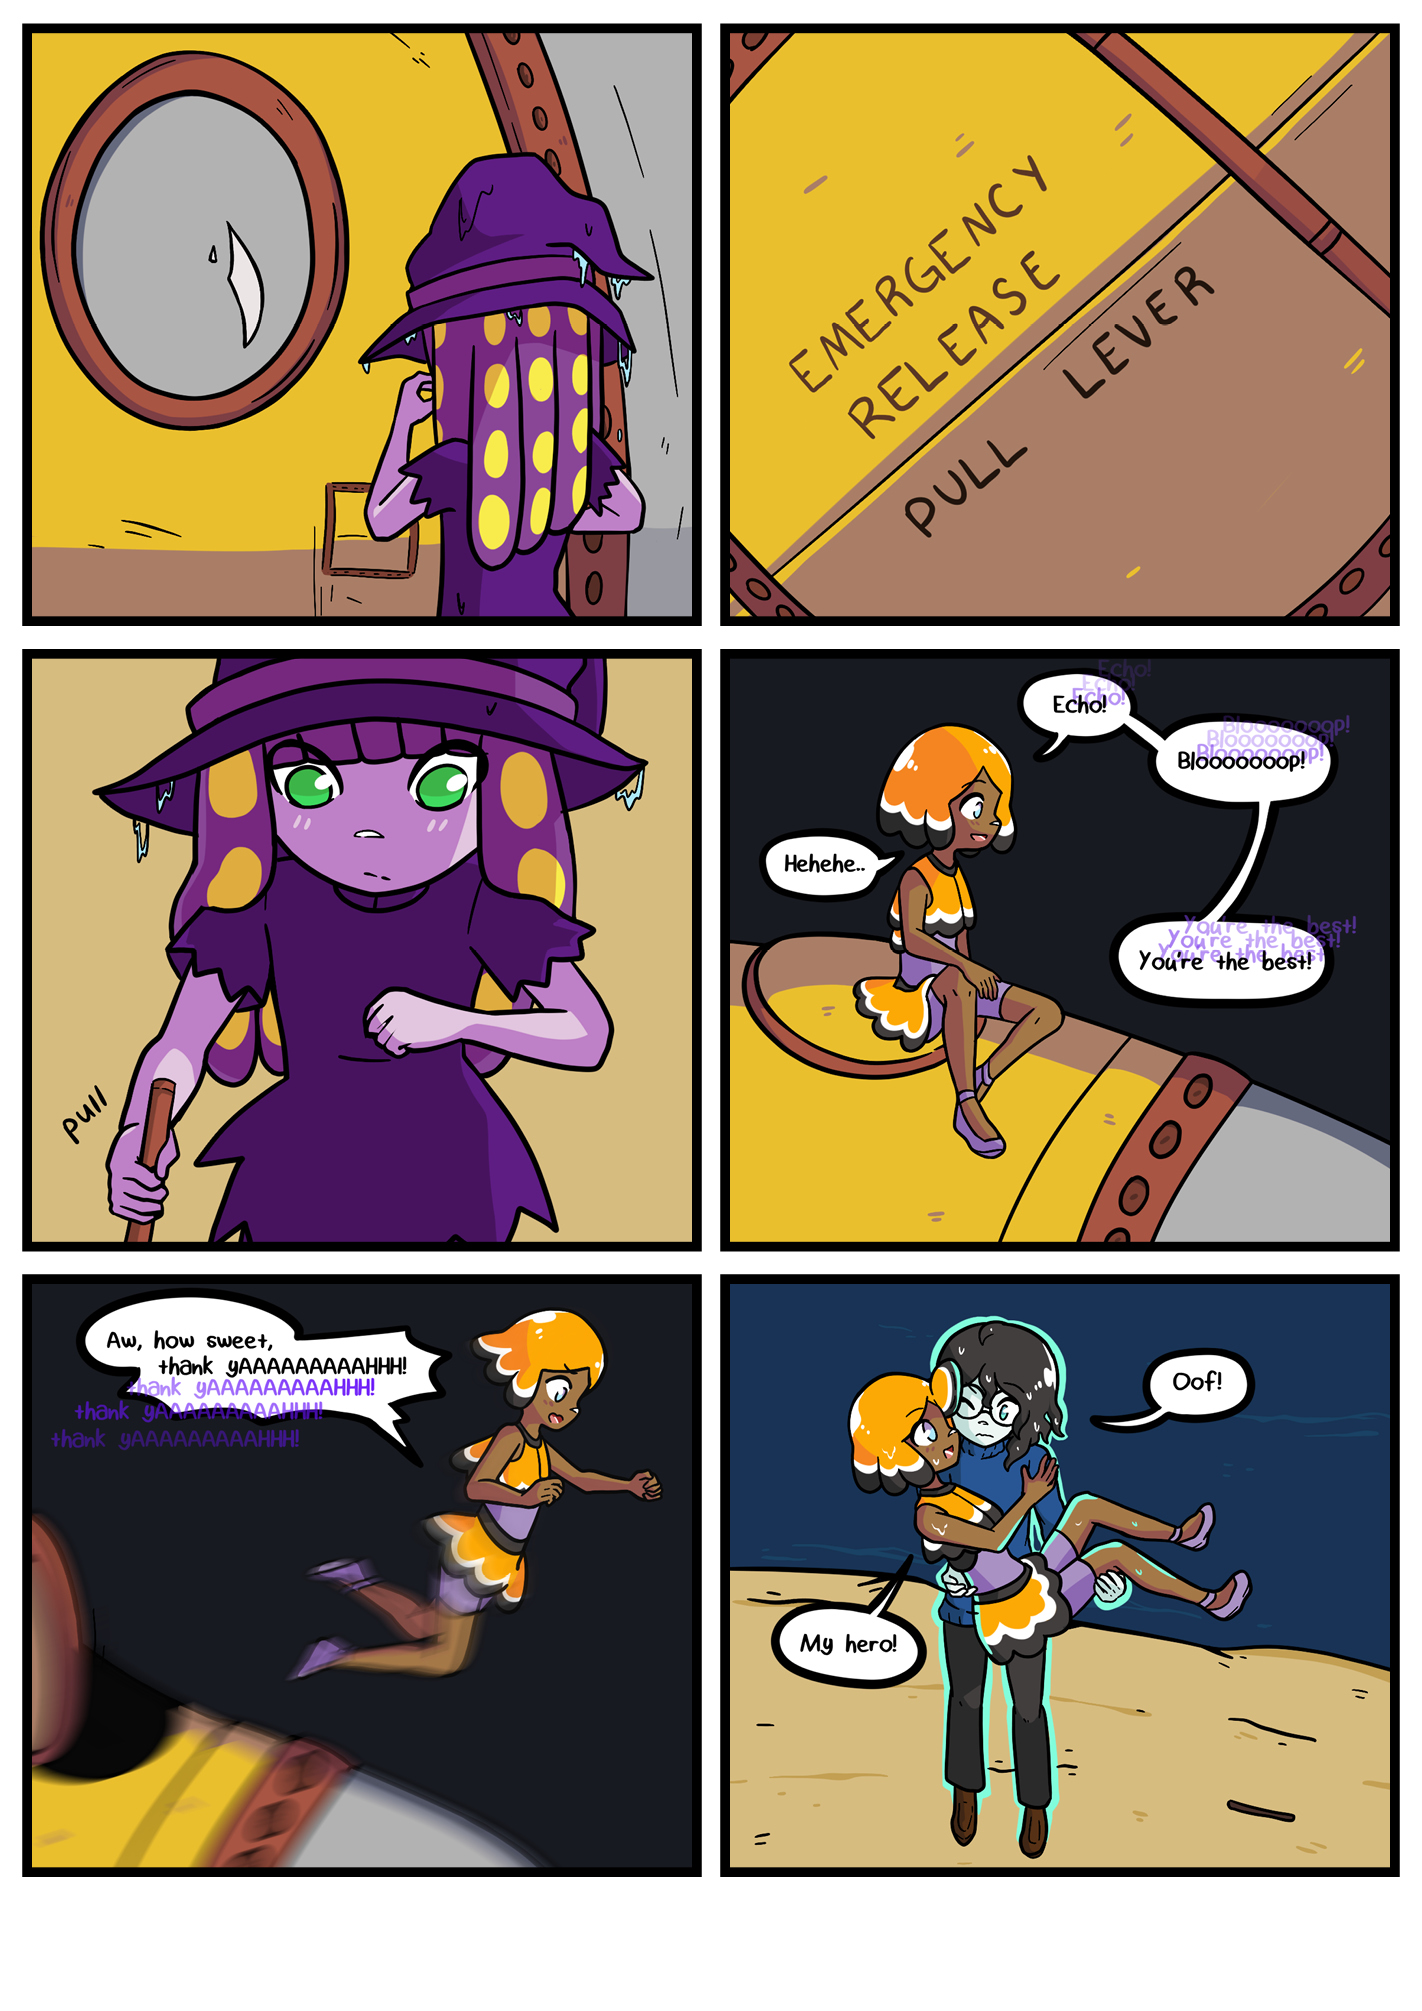 Seasick the underwater adventure comic, chapter 2 page 86 full page